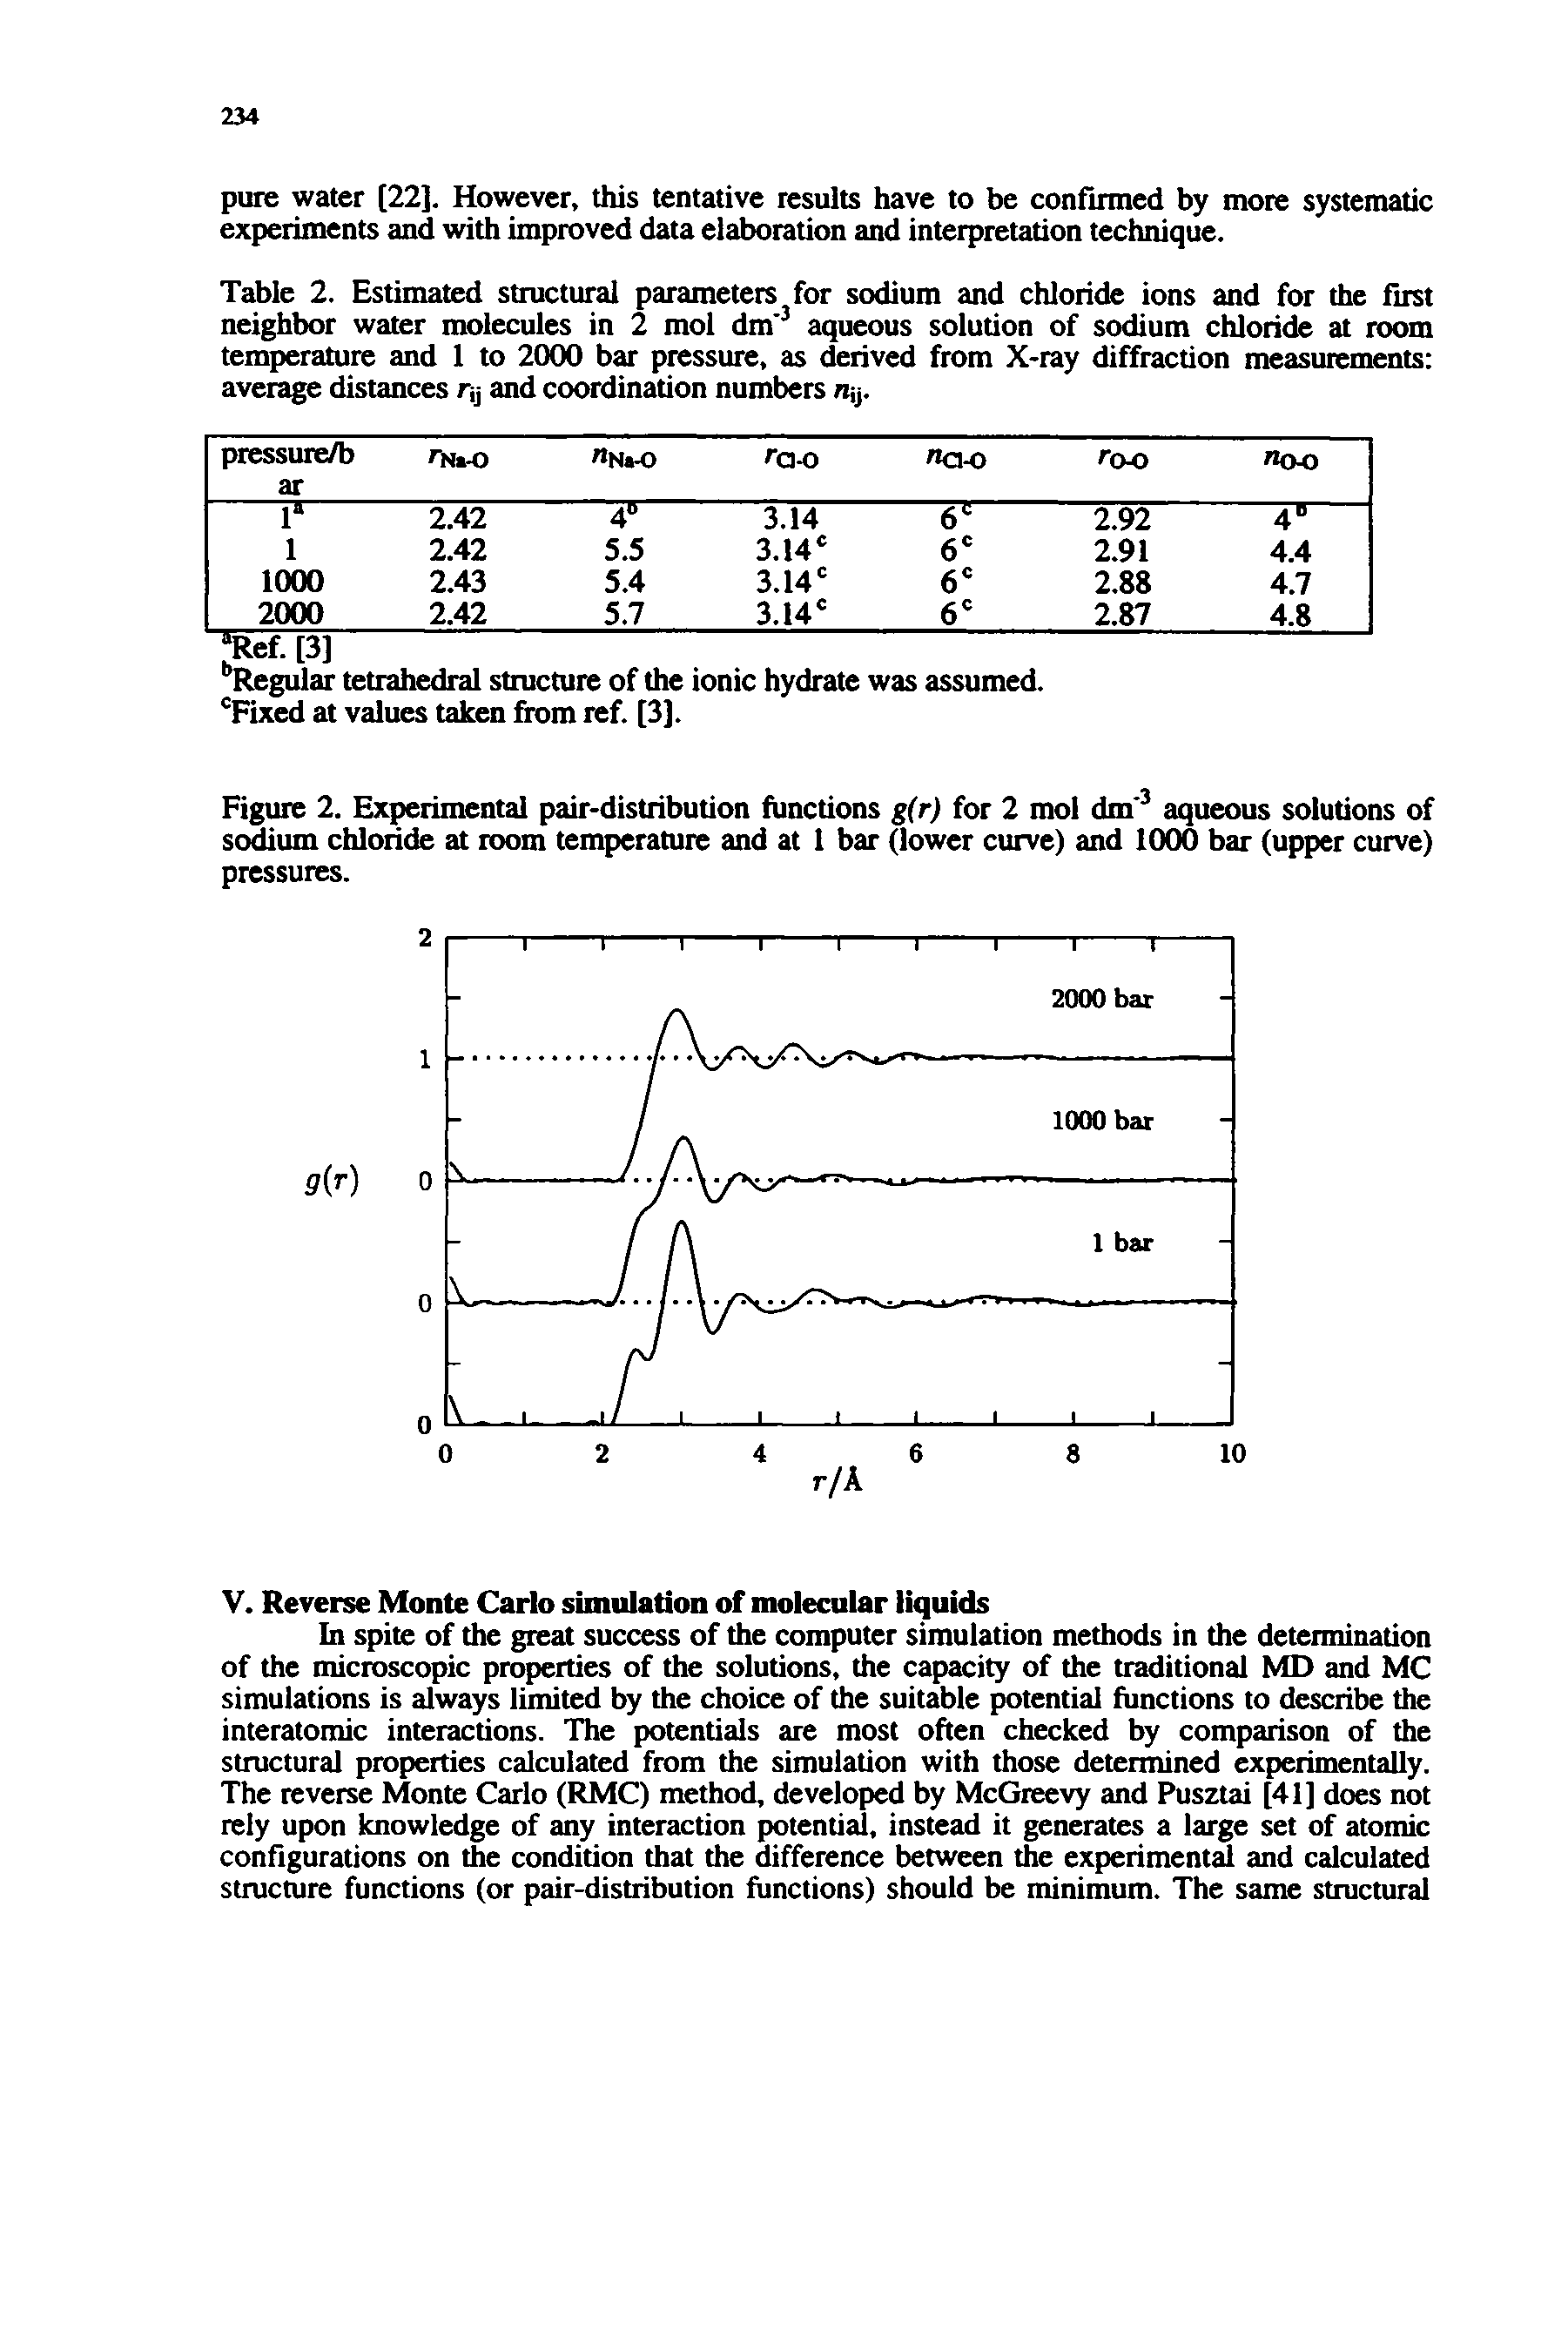 Table 2. Estimated structural parameters for sodium and chloride ions and for the first neighbor water molecules in 2 mol dm" aqueous solution of sodium chloride at room temperature and 1 to 2000 bar pressure, as derived from X-ray diffraction measurements average distances ry and coordination numbers ny.